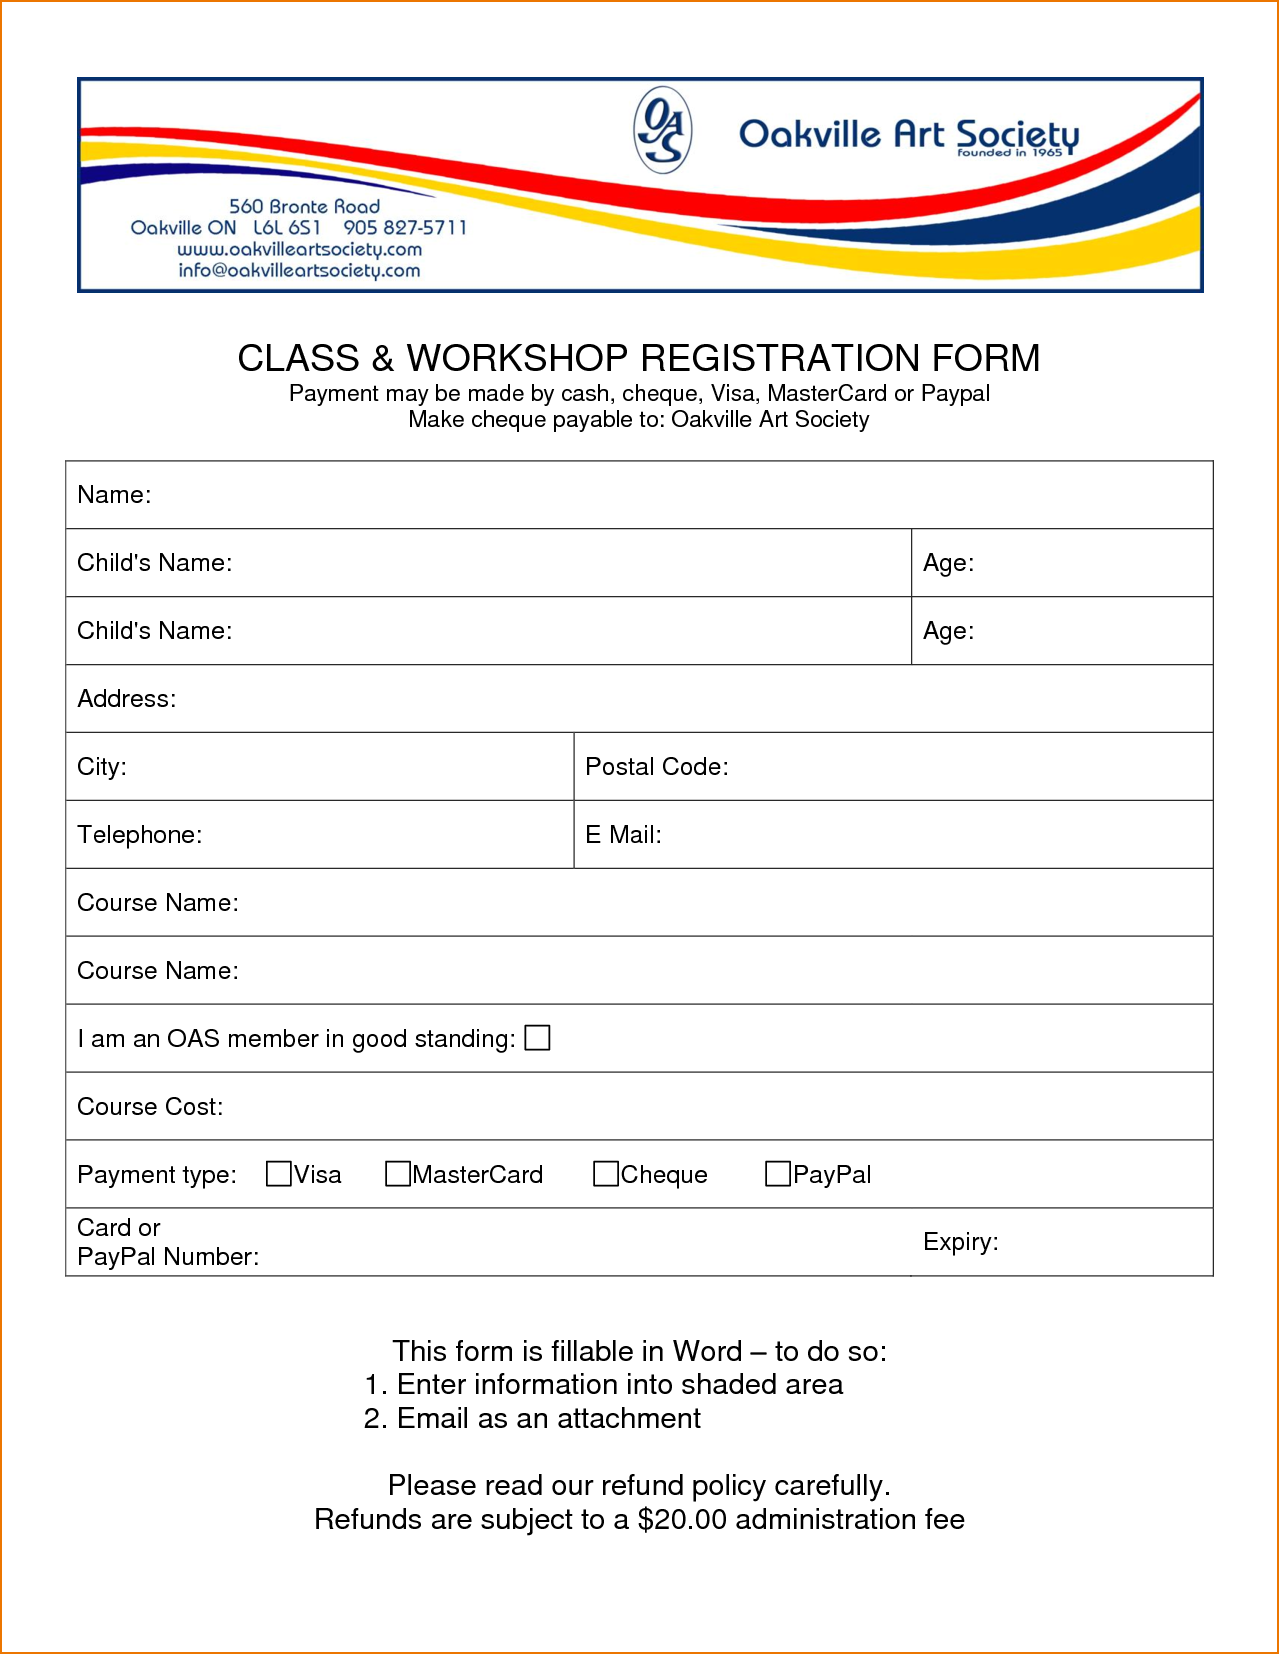 registration form word template   Boat.jeremyeaton.co